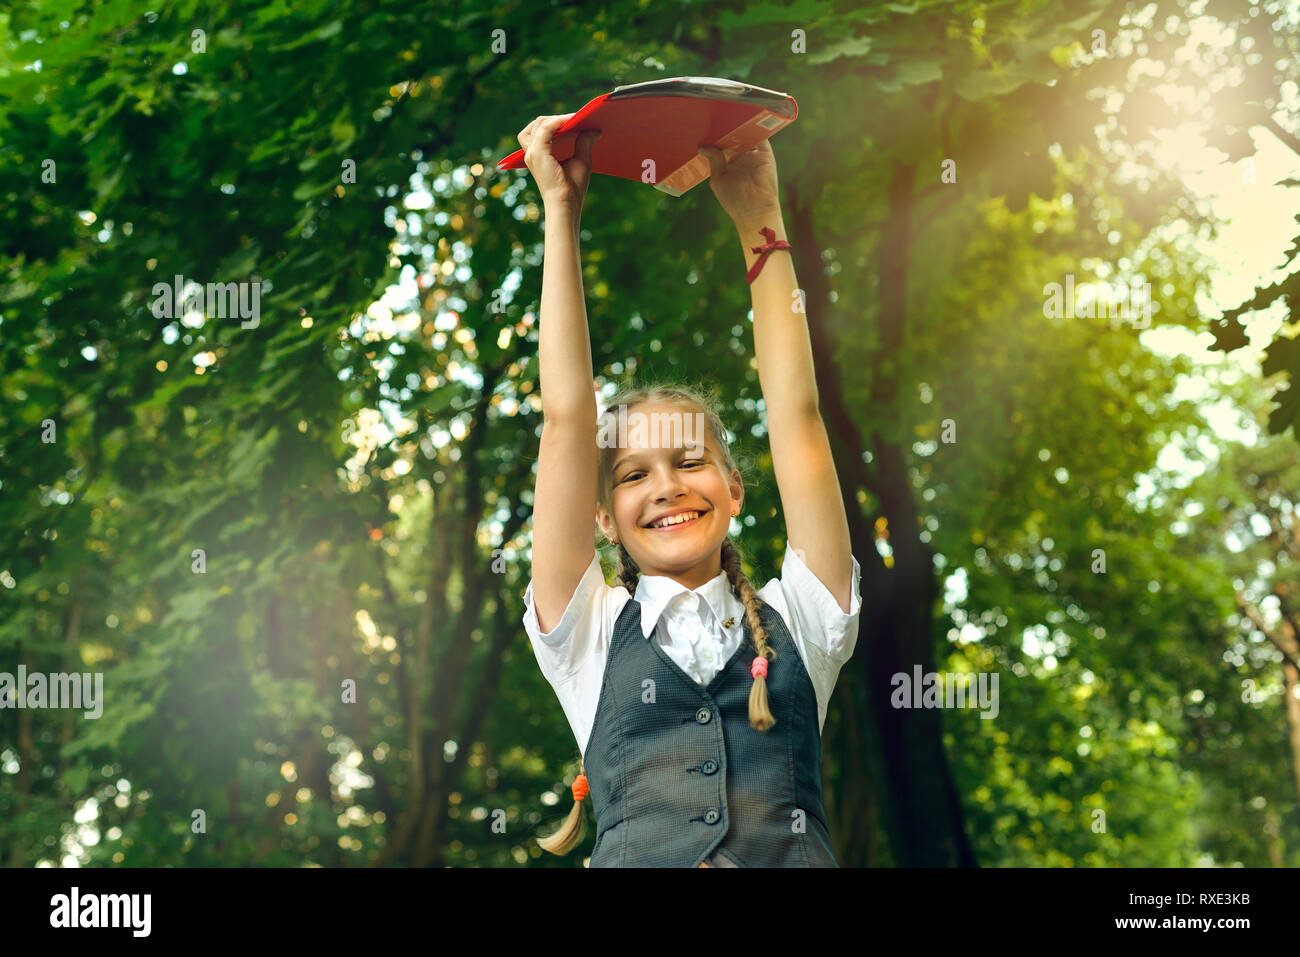 student schoolgirl happy with pigtails in uniform holding books in hands over head in bright sunny day Stock Photo